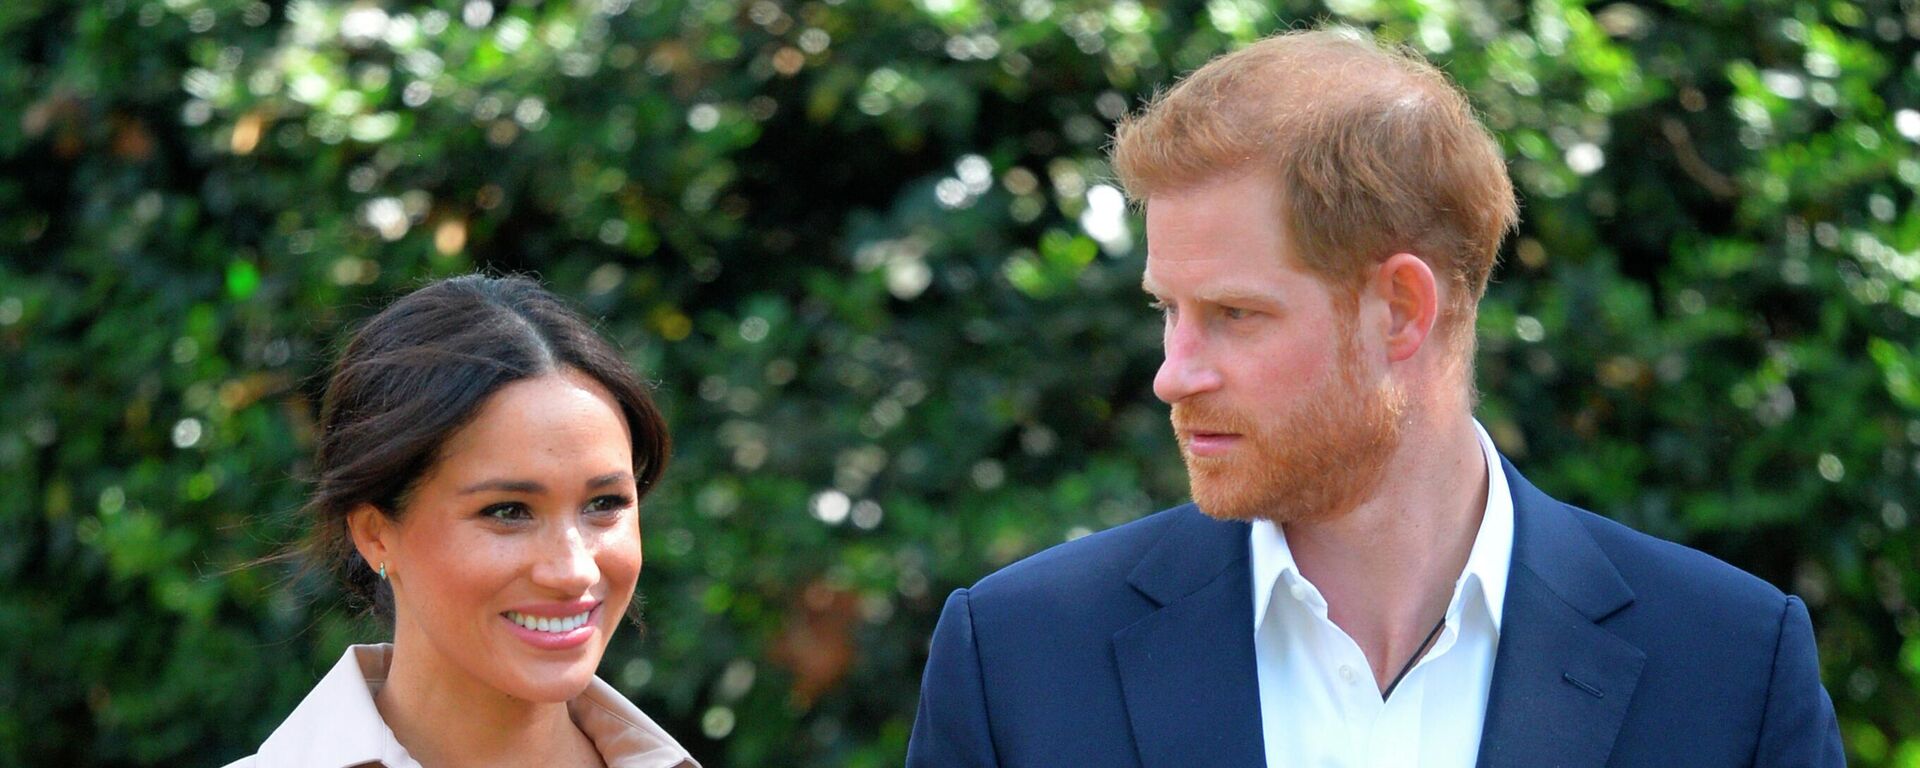 FILE - In this Oct. 2, 2019, file photo, Britain's Prince Harry and Meghan Markle appear at the Creative Industries and Business Reception at the British High Commissioner's residence in Johannesburg.  - Sputnik International, 1920, 02.12.2022